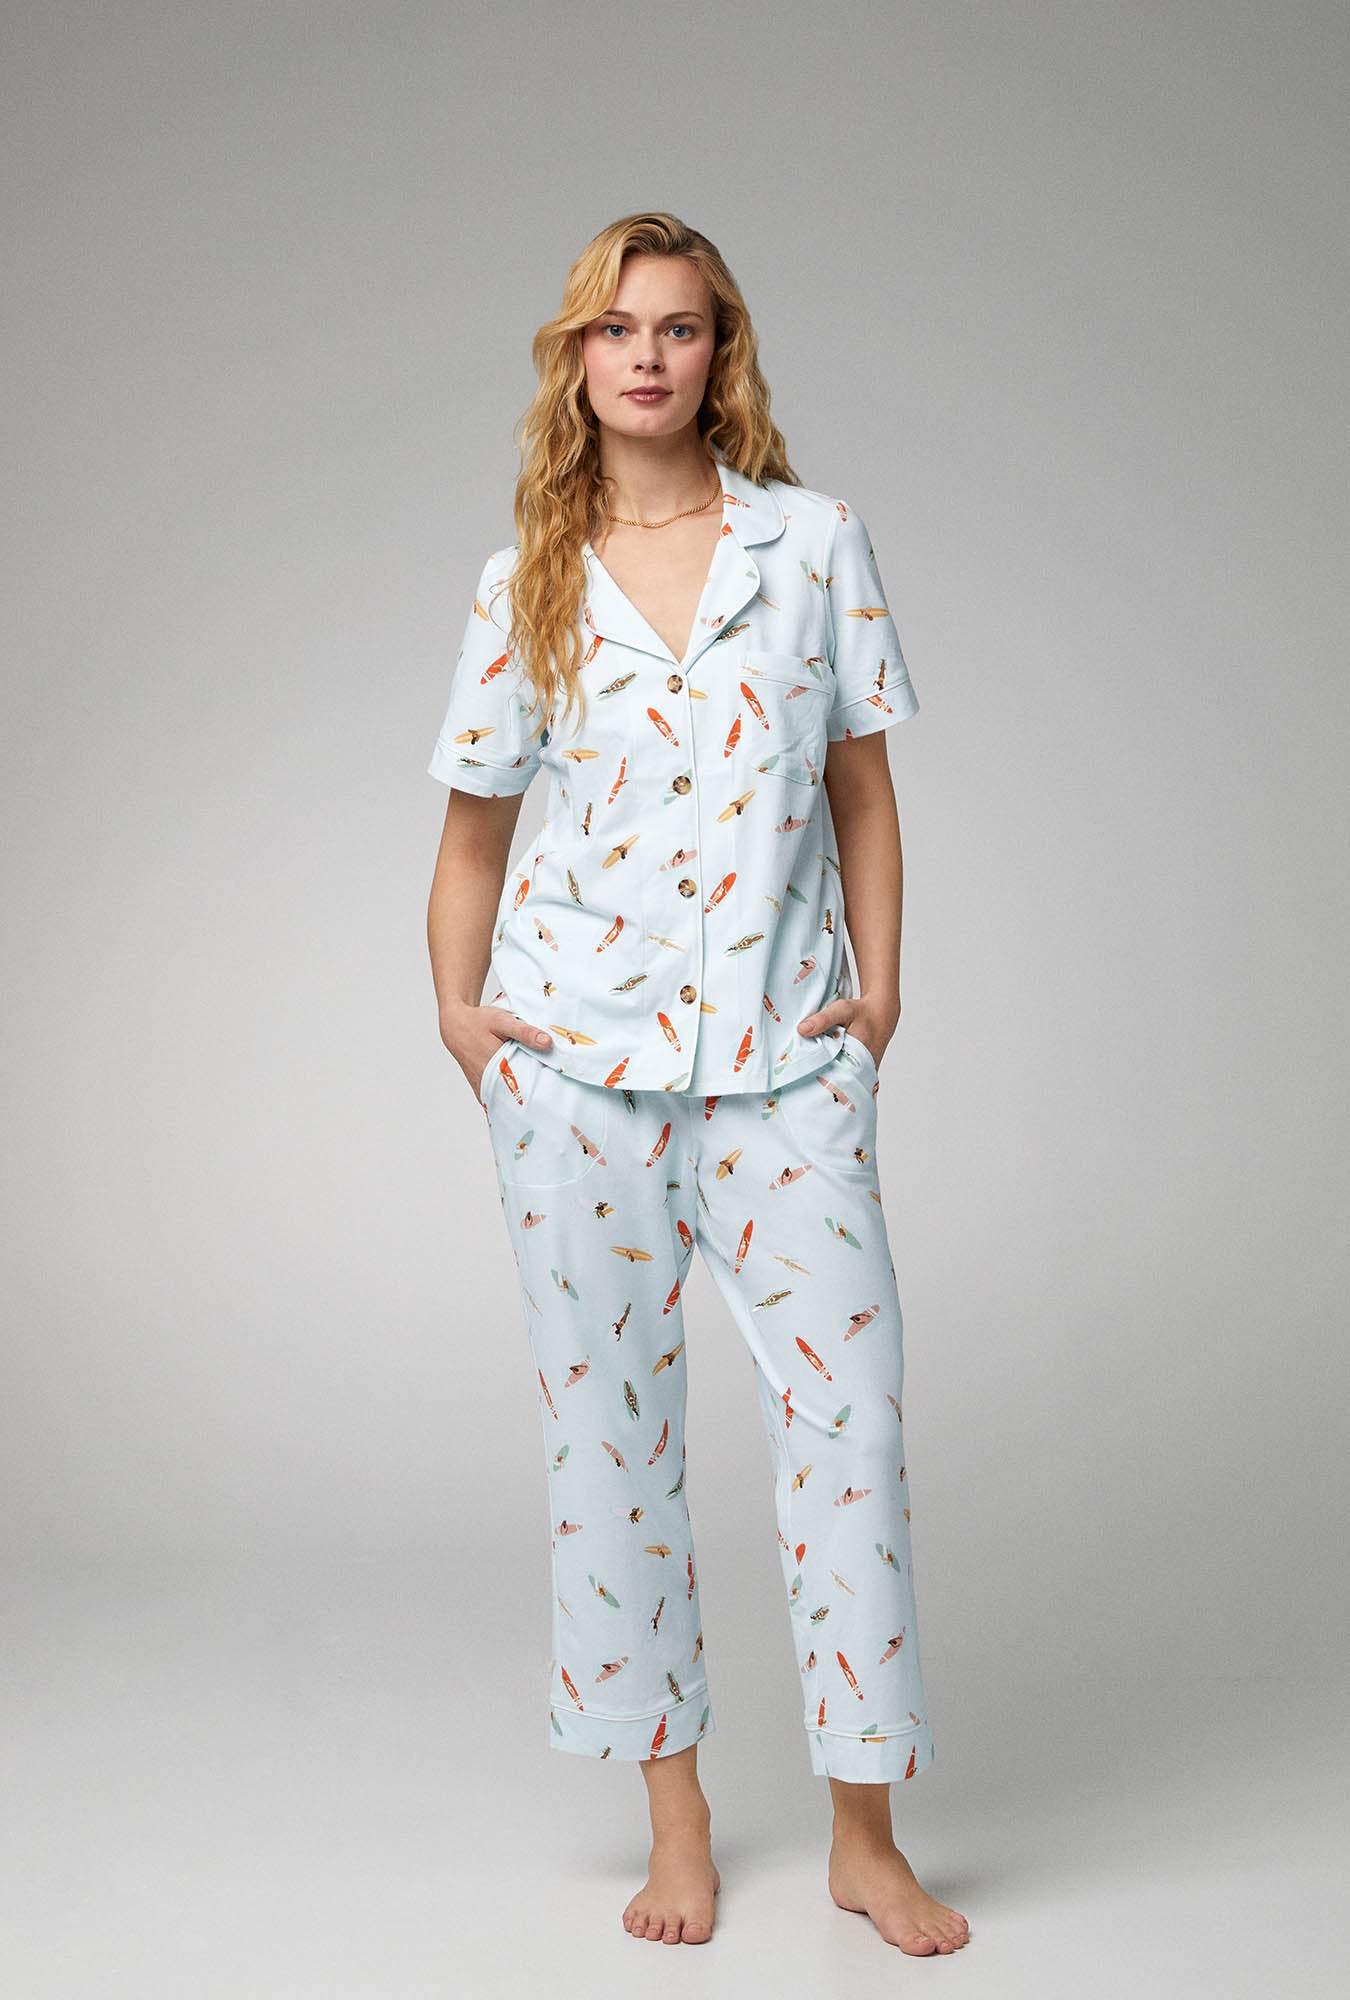 A lady wearing white short sleeve classic stretch jersey pj set with retro surf print.